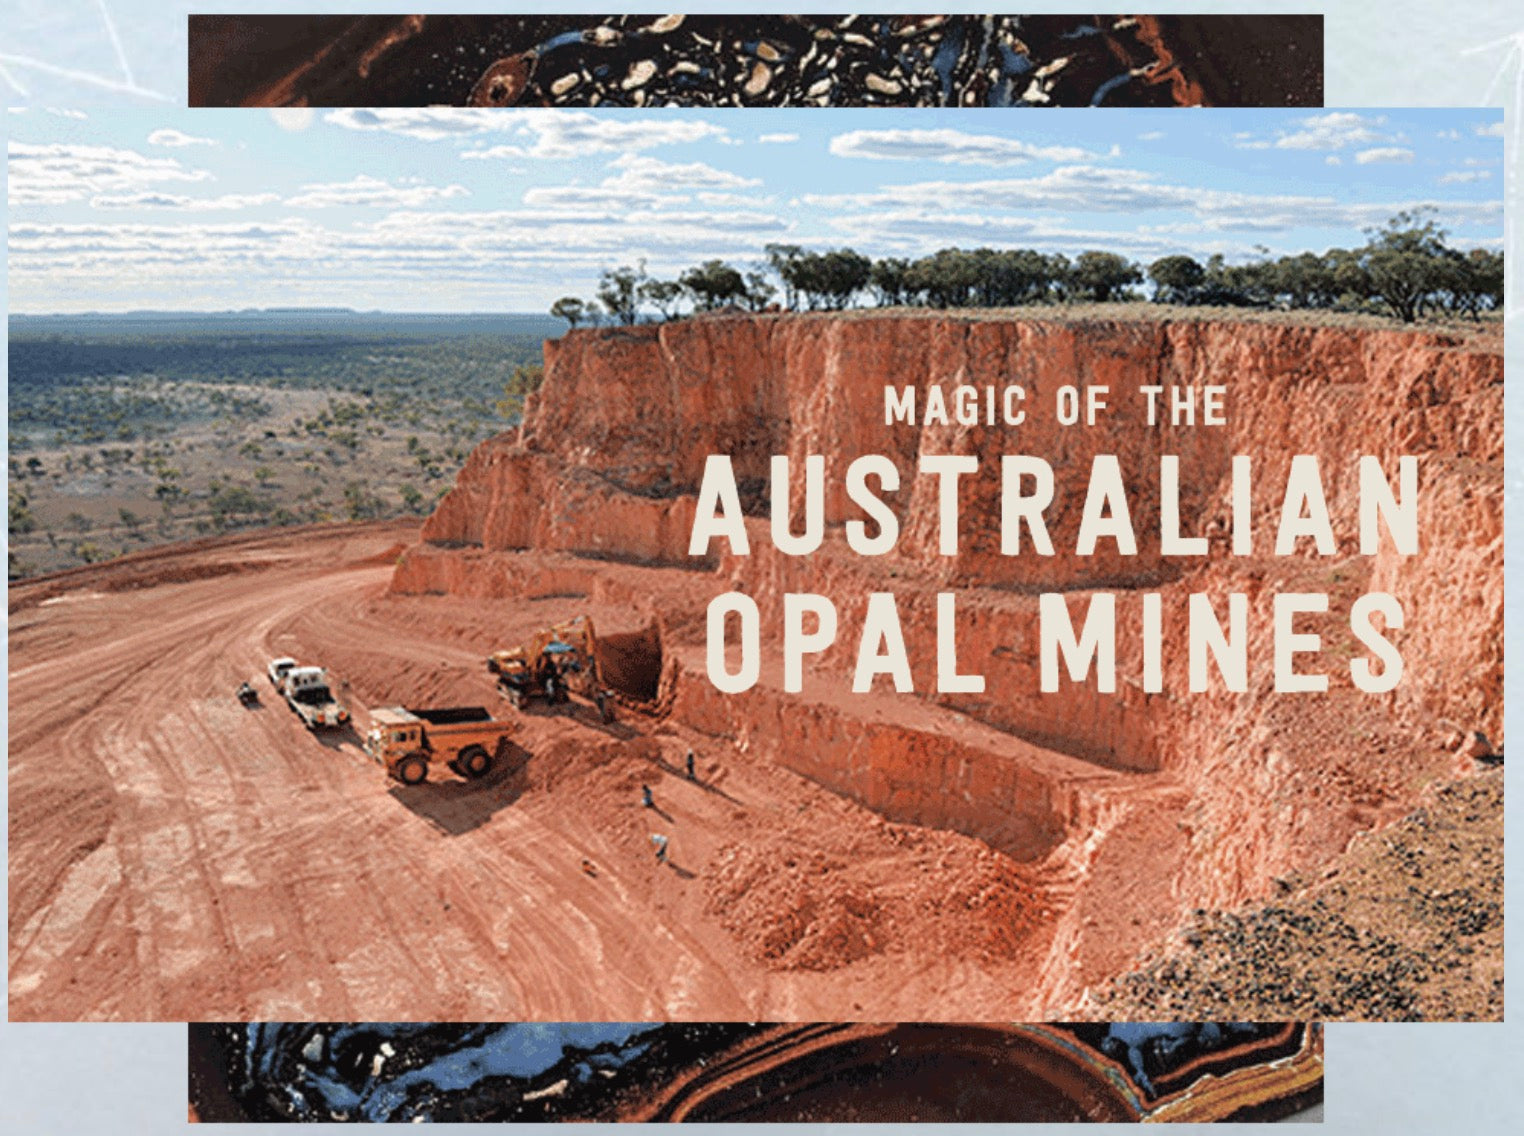 OPAL MINES OF THE OUTBACK